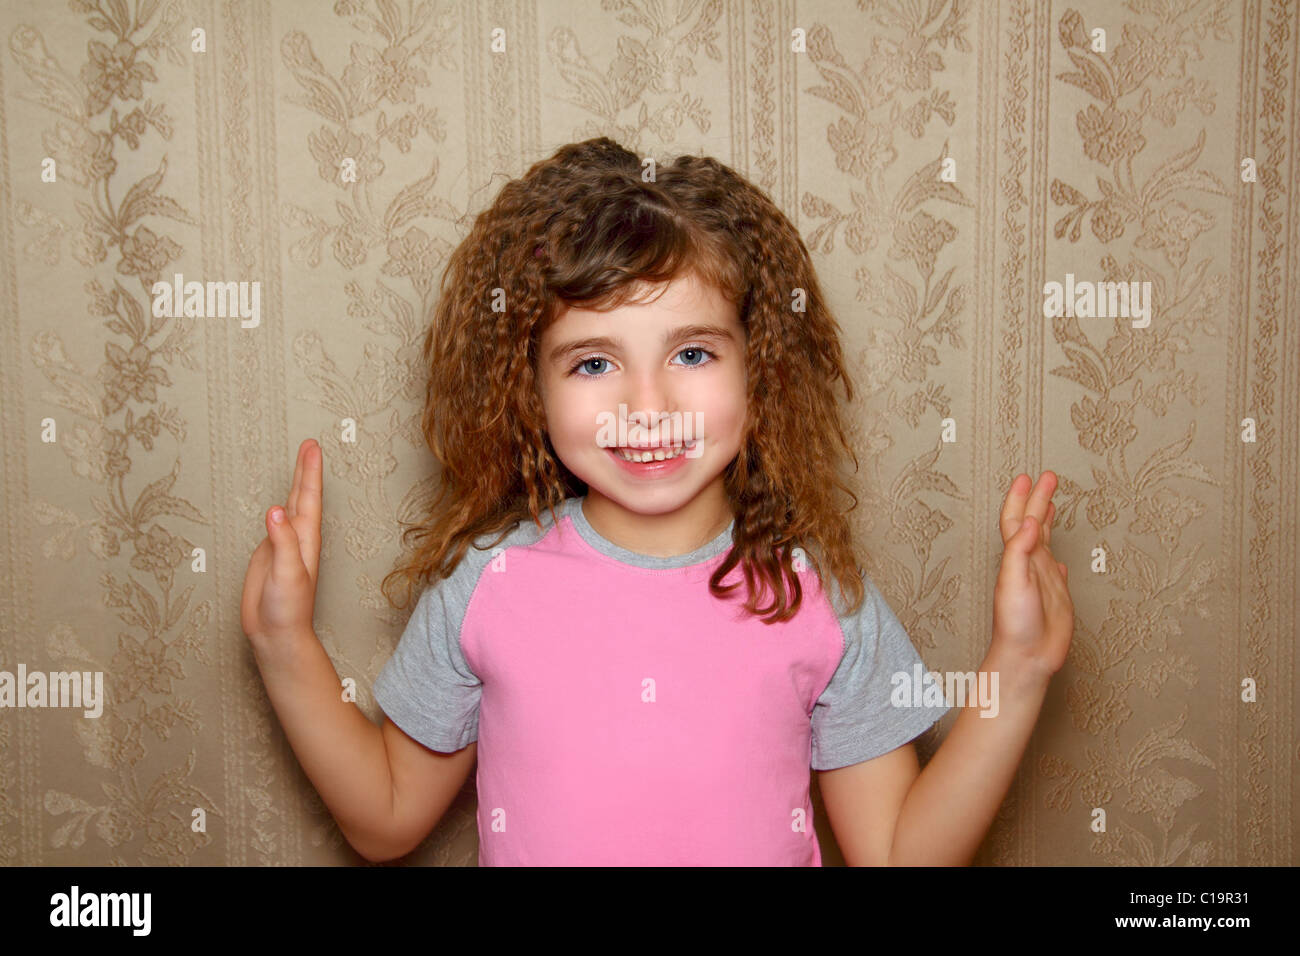 little girl happy funny expression on vintage retro wallpaper Stock Photo